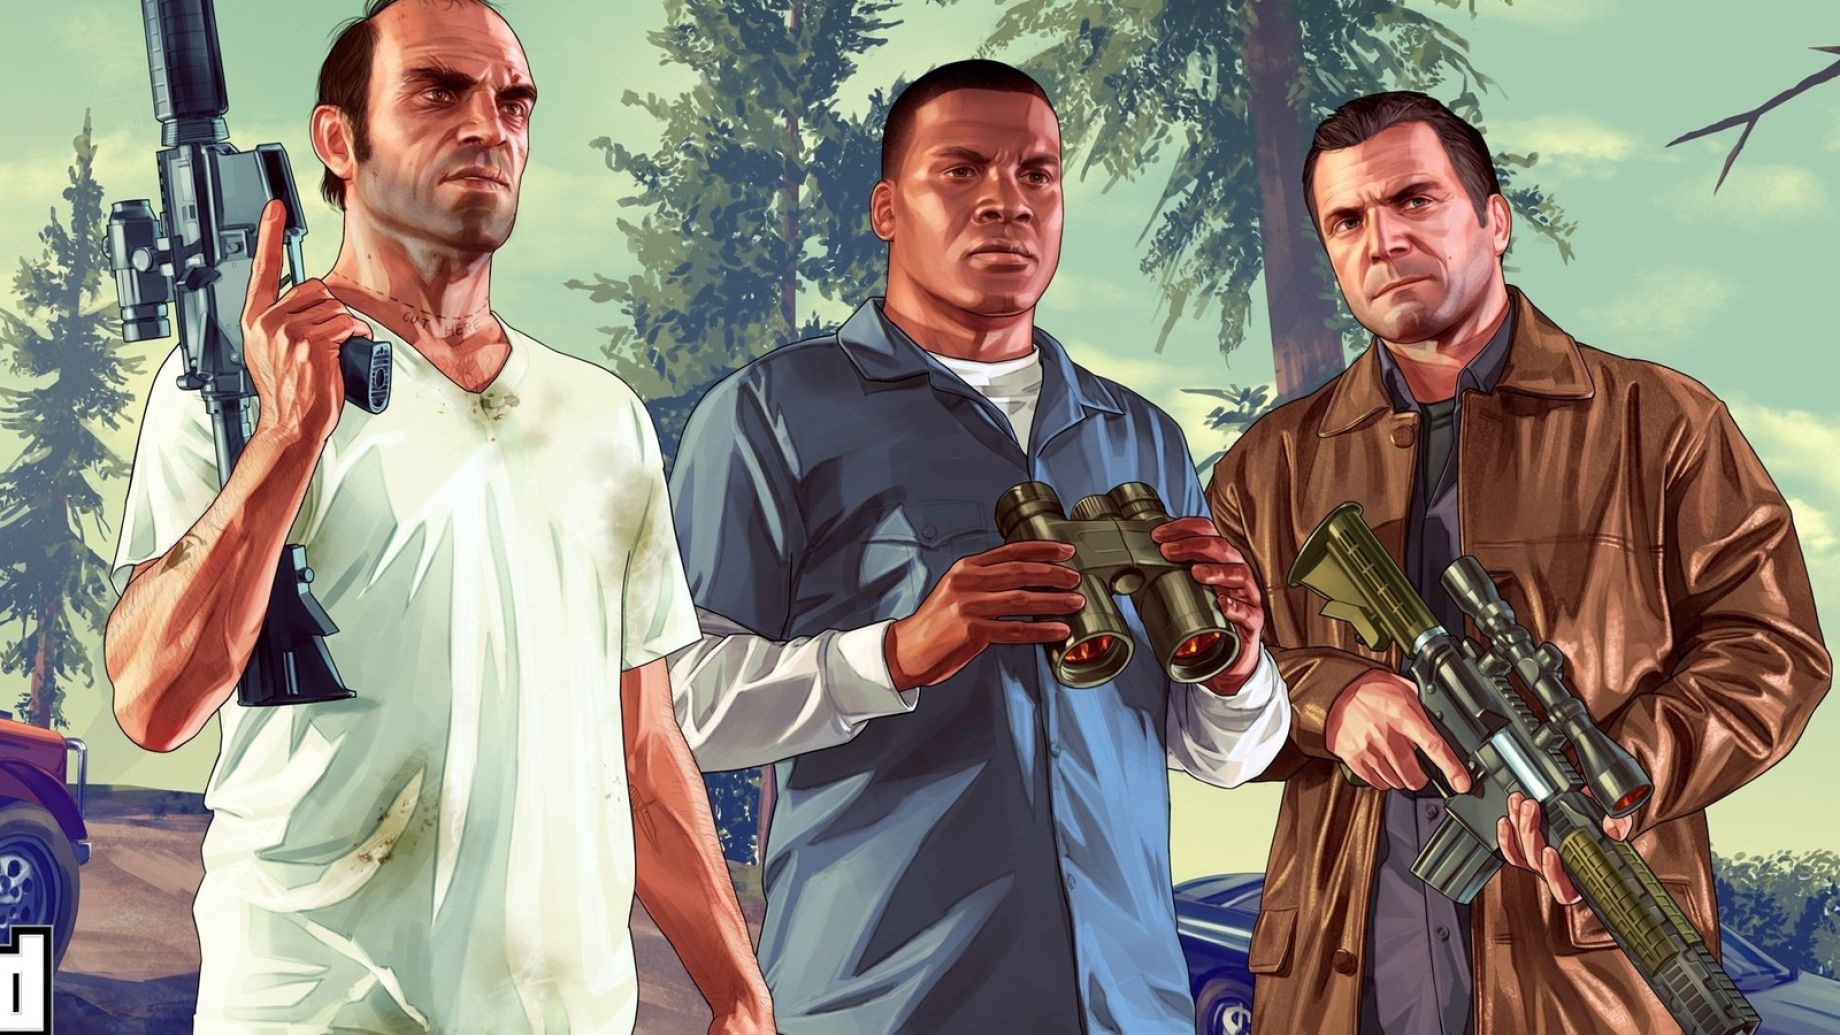 Rockstar Games Confirms Hacker Stole Early Grand Theft Auto VI Footage